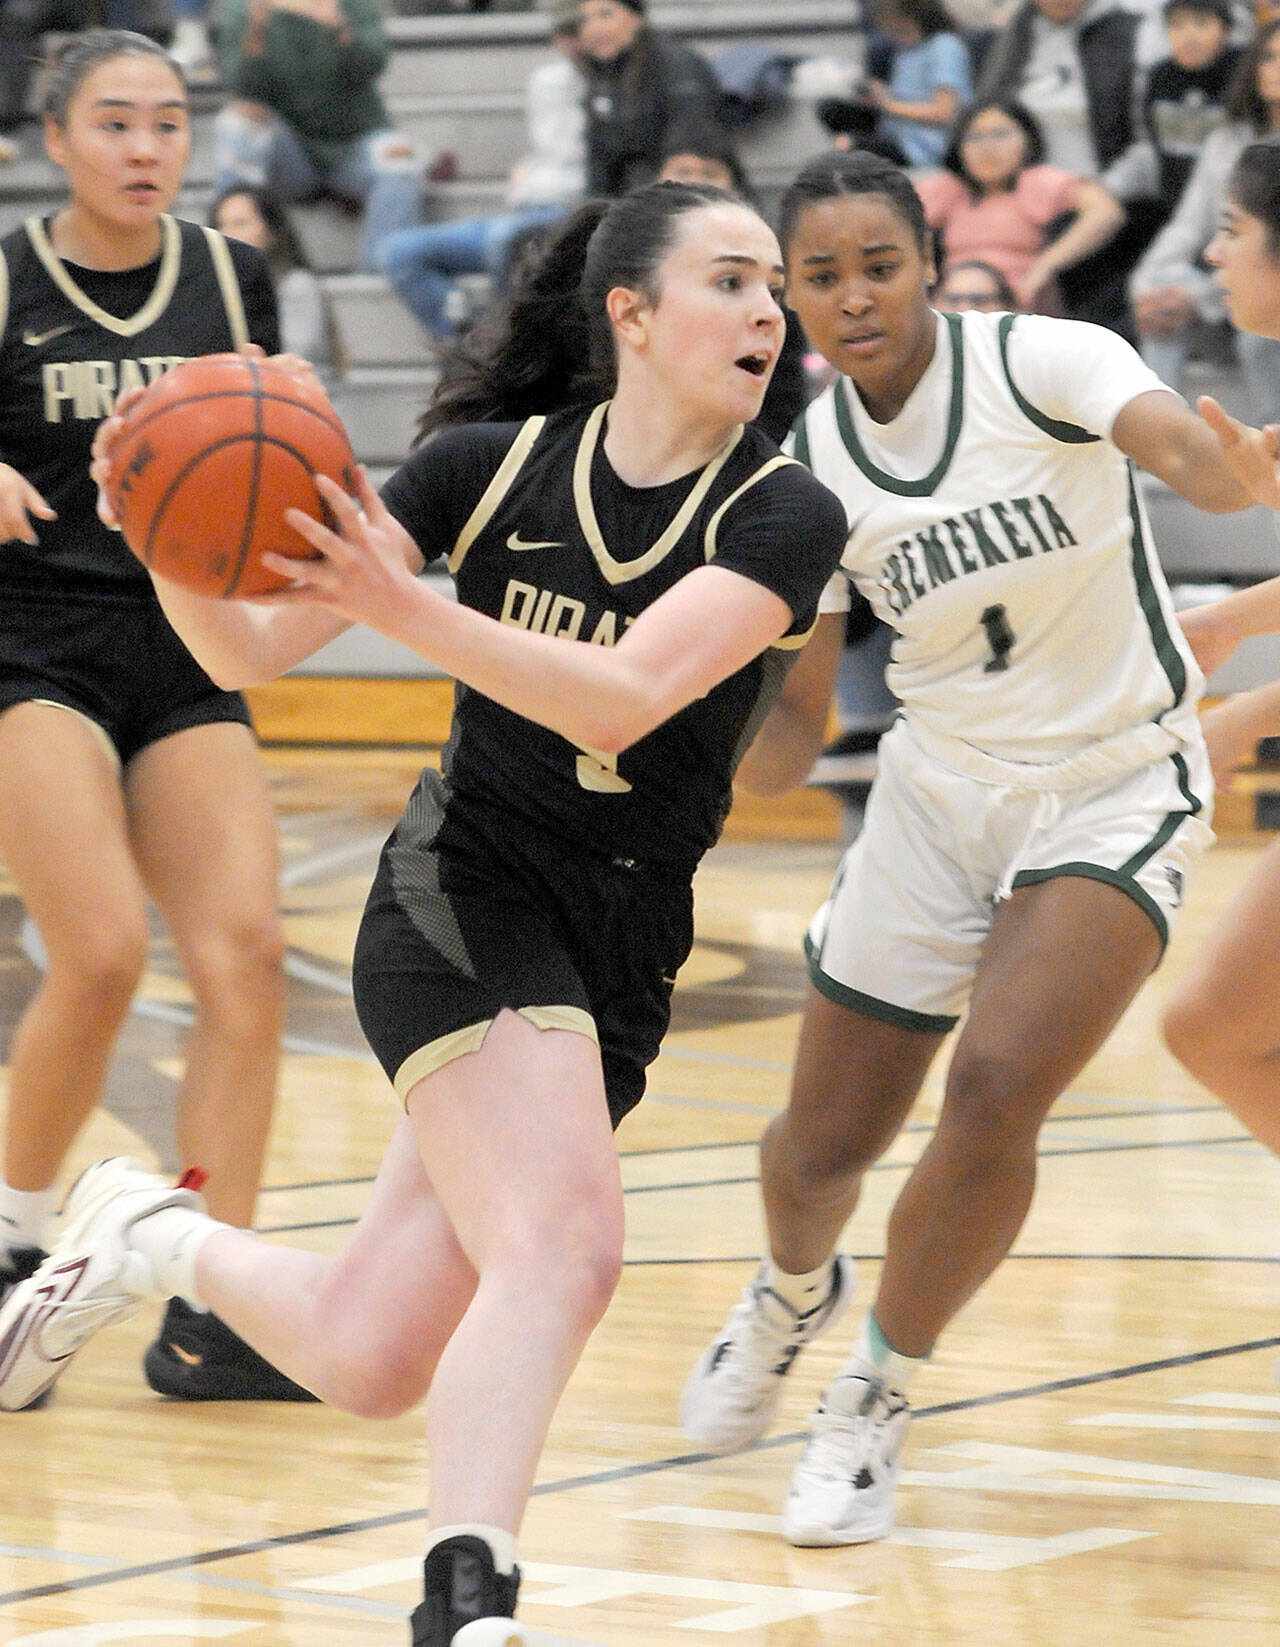 Peninsula’s Alexa Mackey, center, heads for the lane as teammate Jenilee Donovan, left, and Chemeketa’s McKenzie Syphard look on during Saturday’s game in the Pirate Classic Tournament. (Keith Thorpe/Peninsula Daily News)